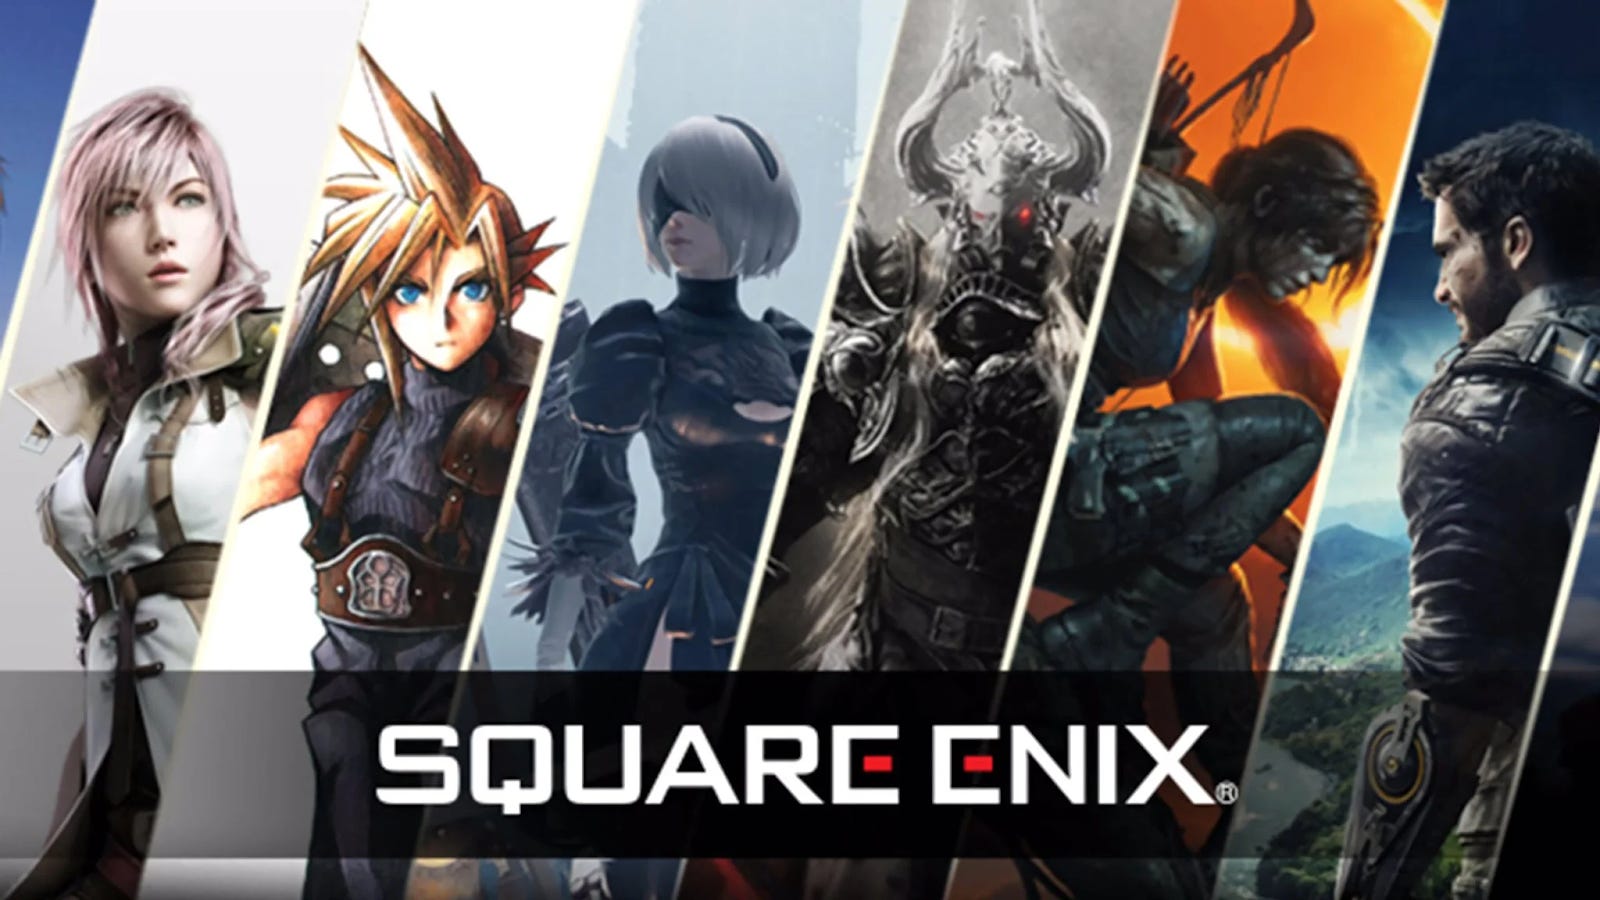 Changes at Square Enix - WEEKLY RECON